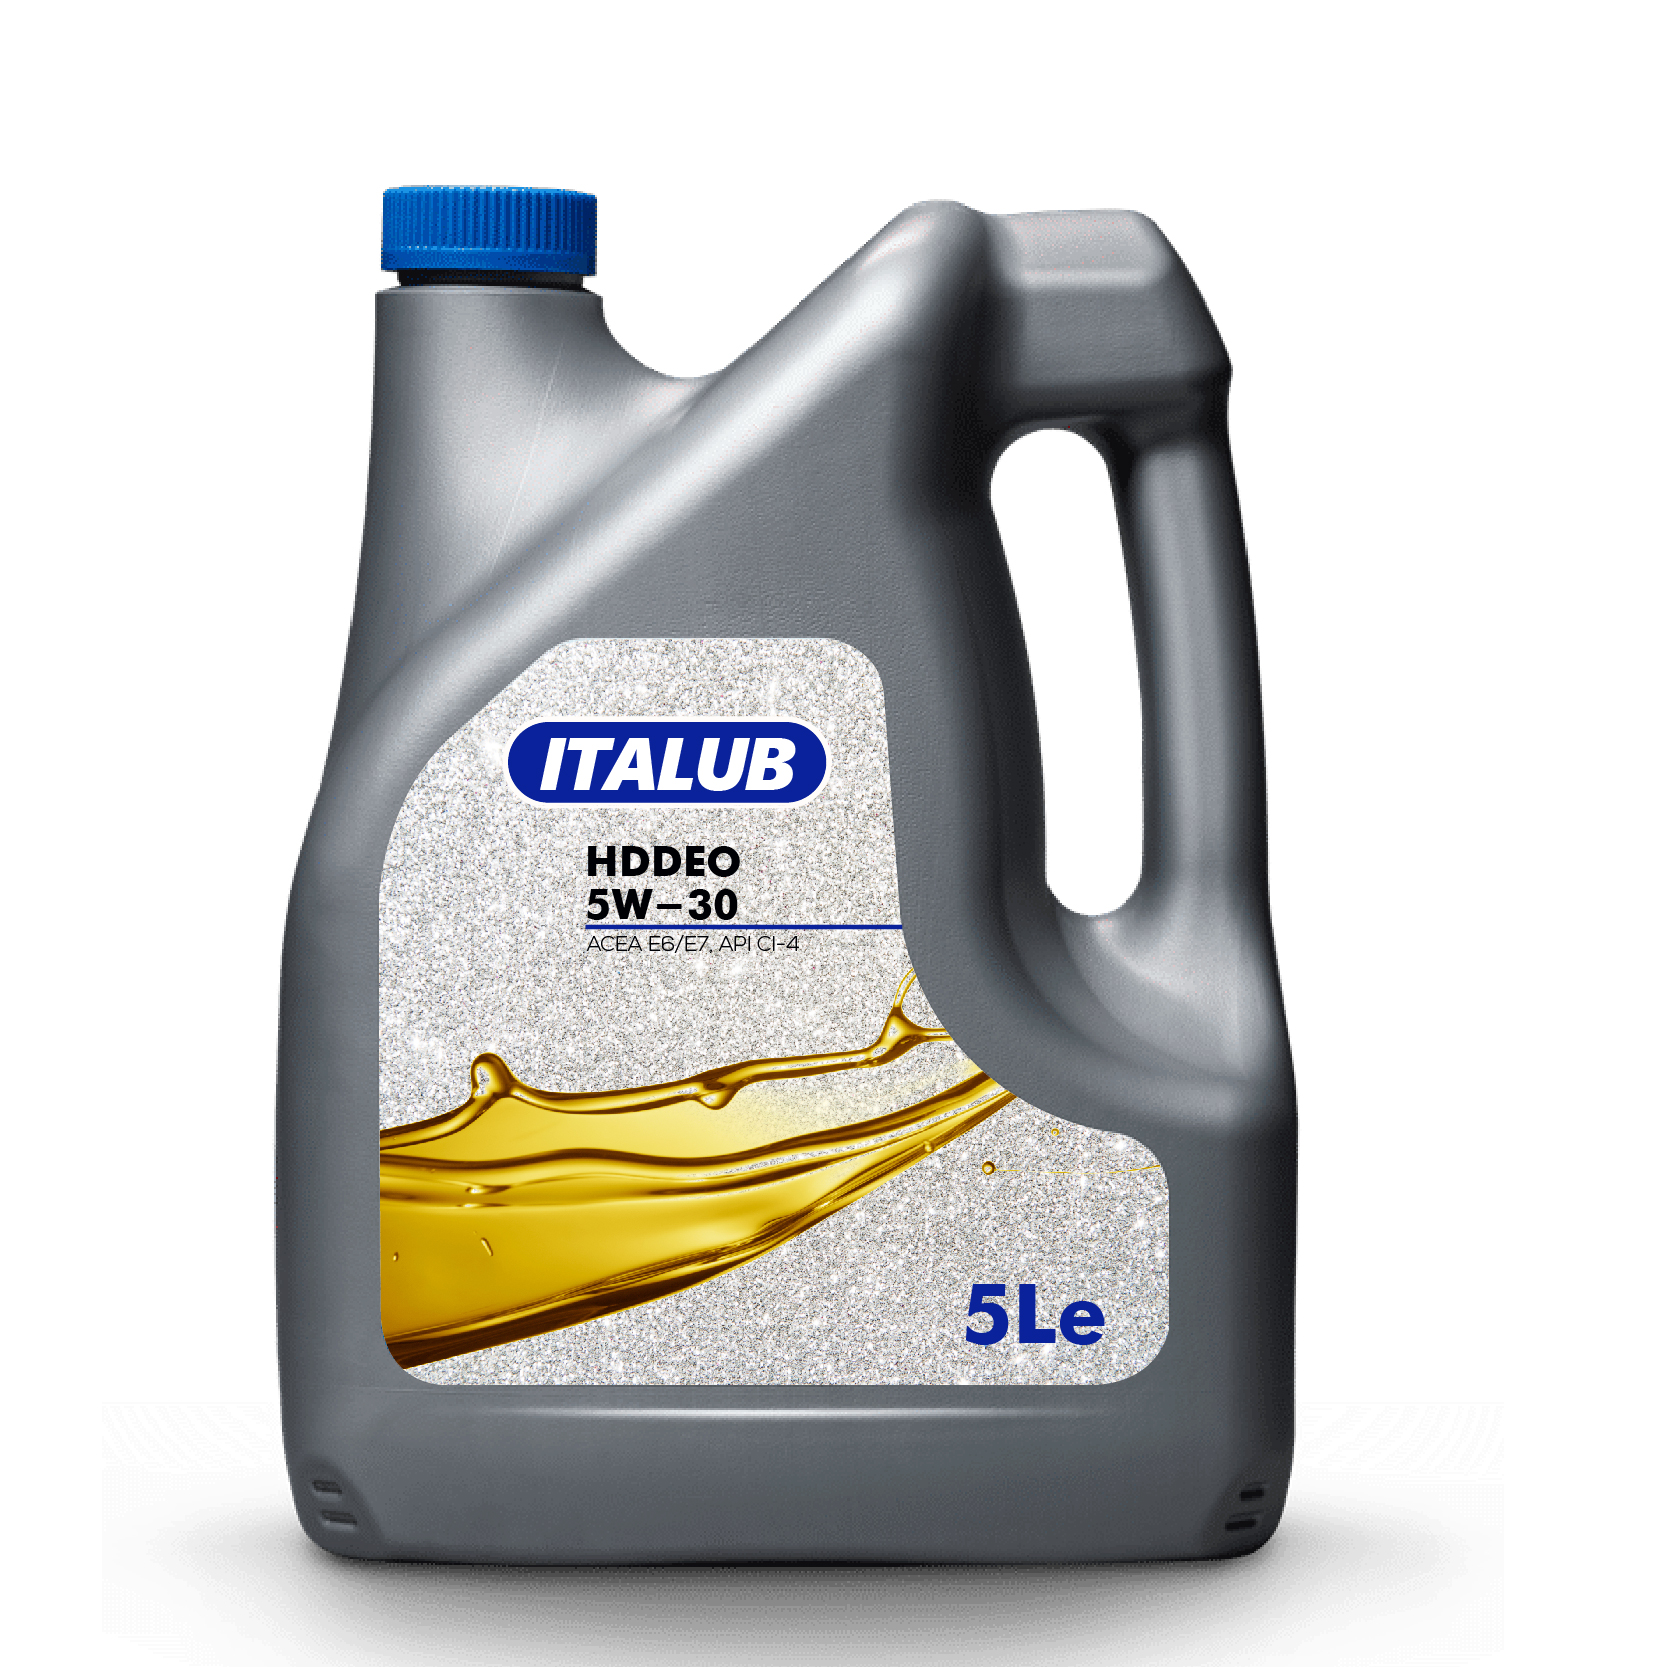 What is CI-4/E7 Diesel Engine Oil Additive Complex?